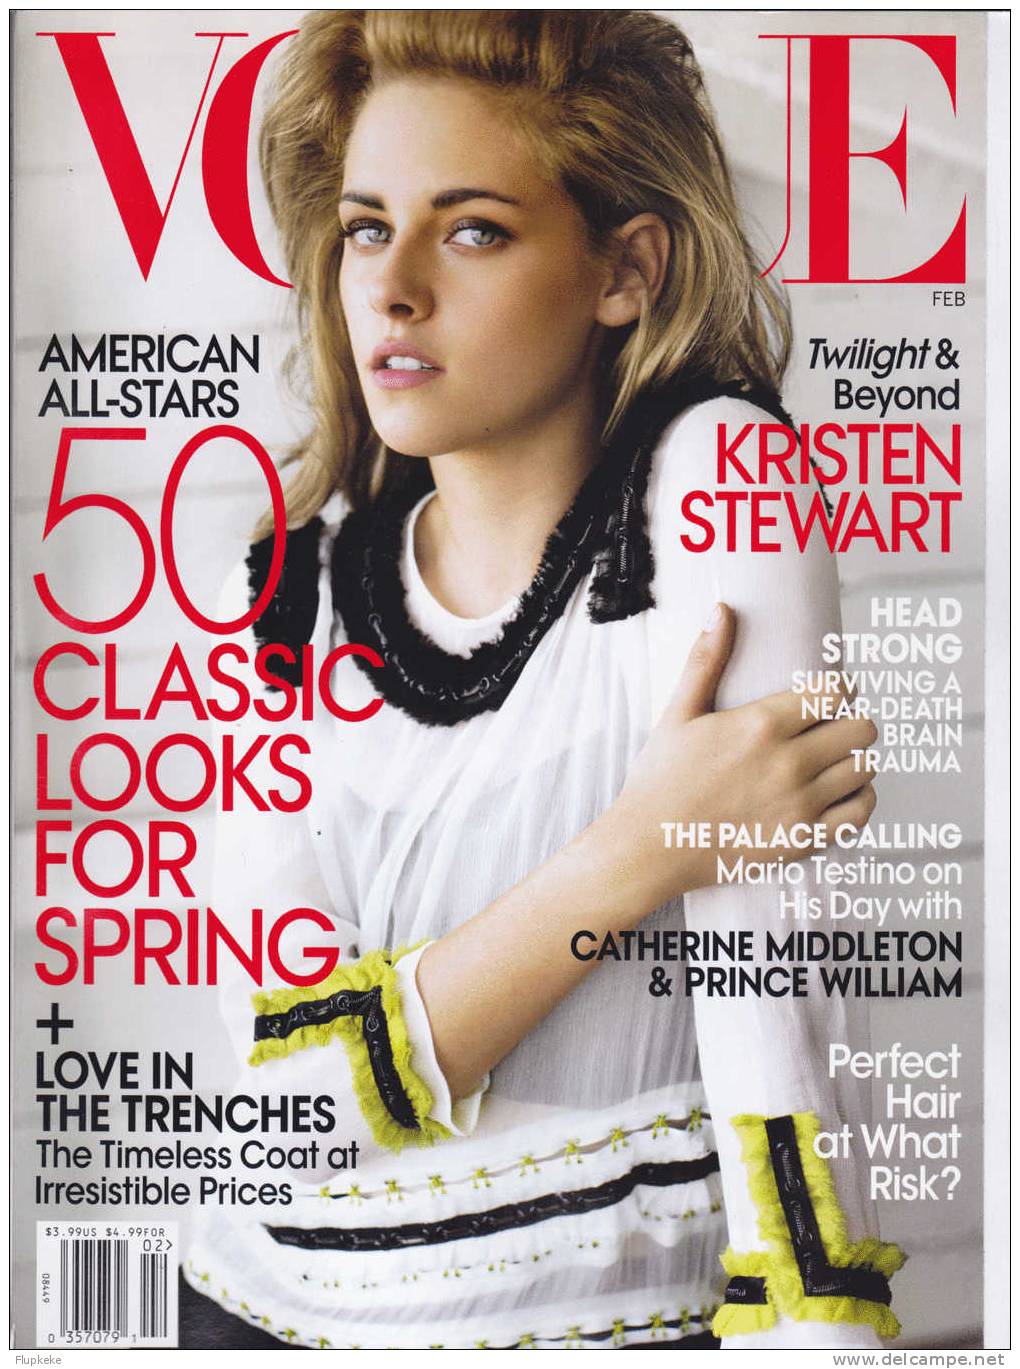 Vogue February 2011 American All-Star 50 Classic Looks For Spring Cover Kristen Stewart - Entertainment